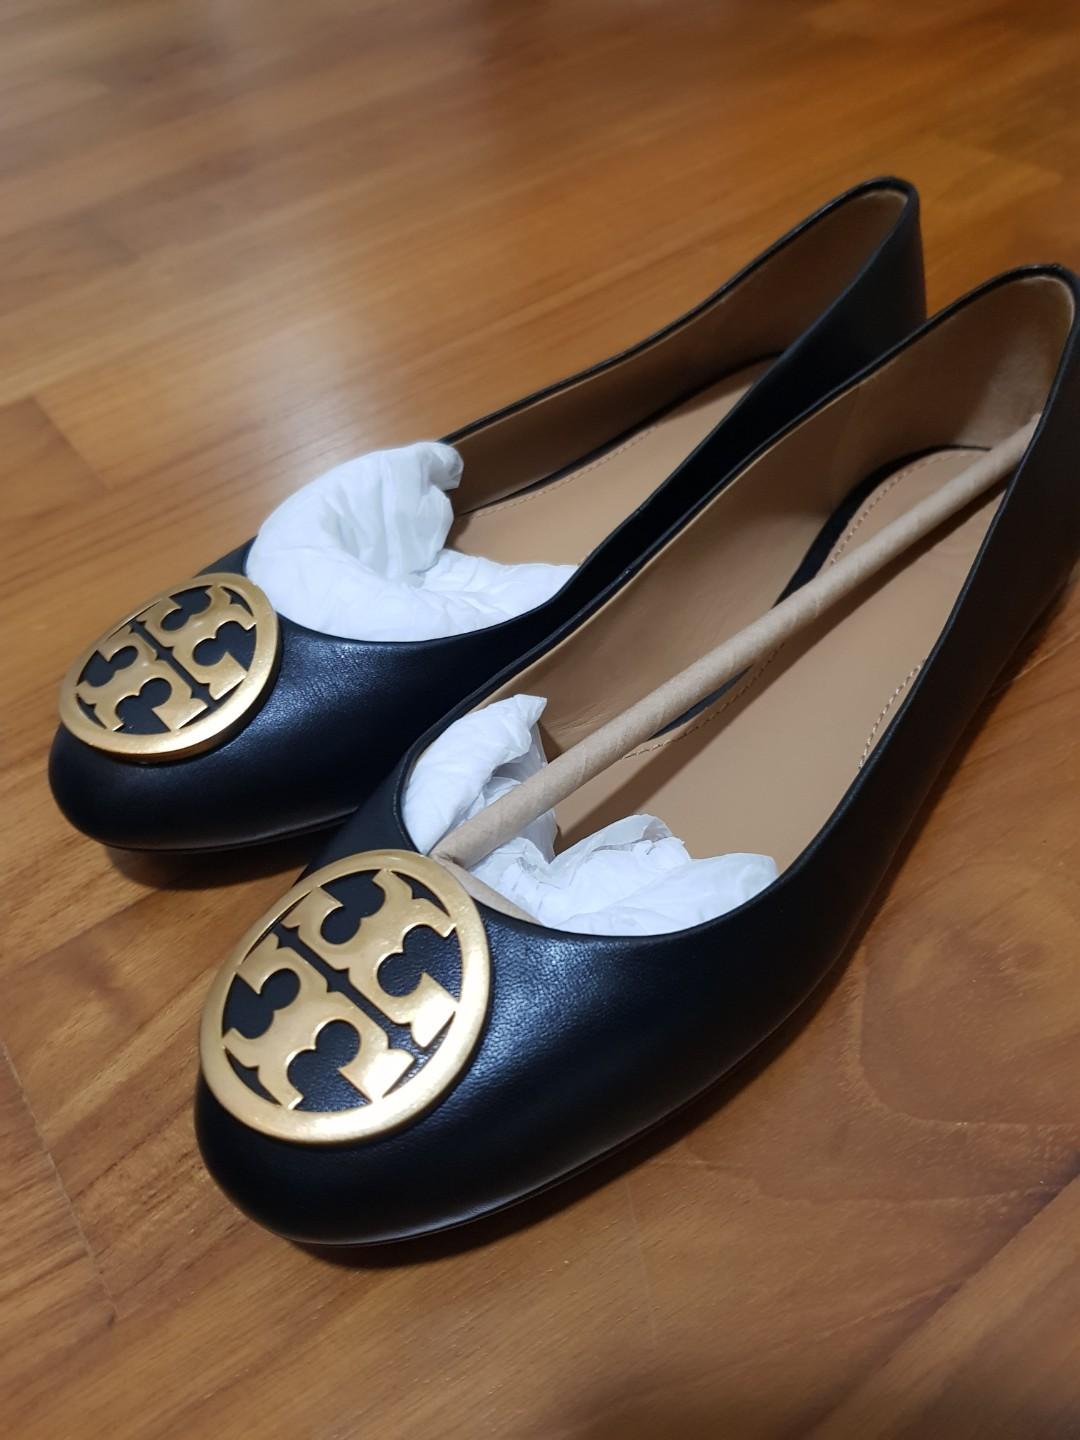 tory burch shoes online